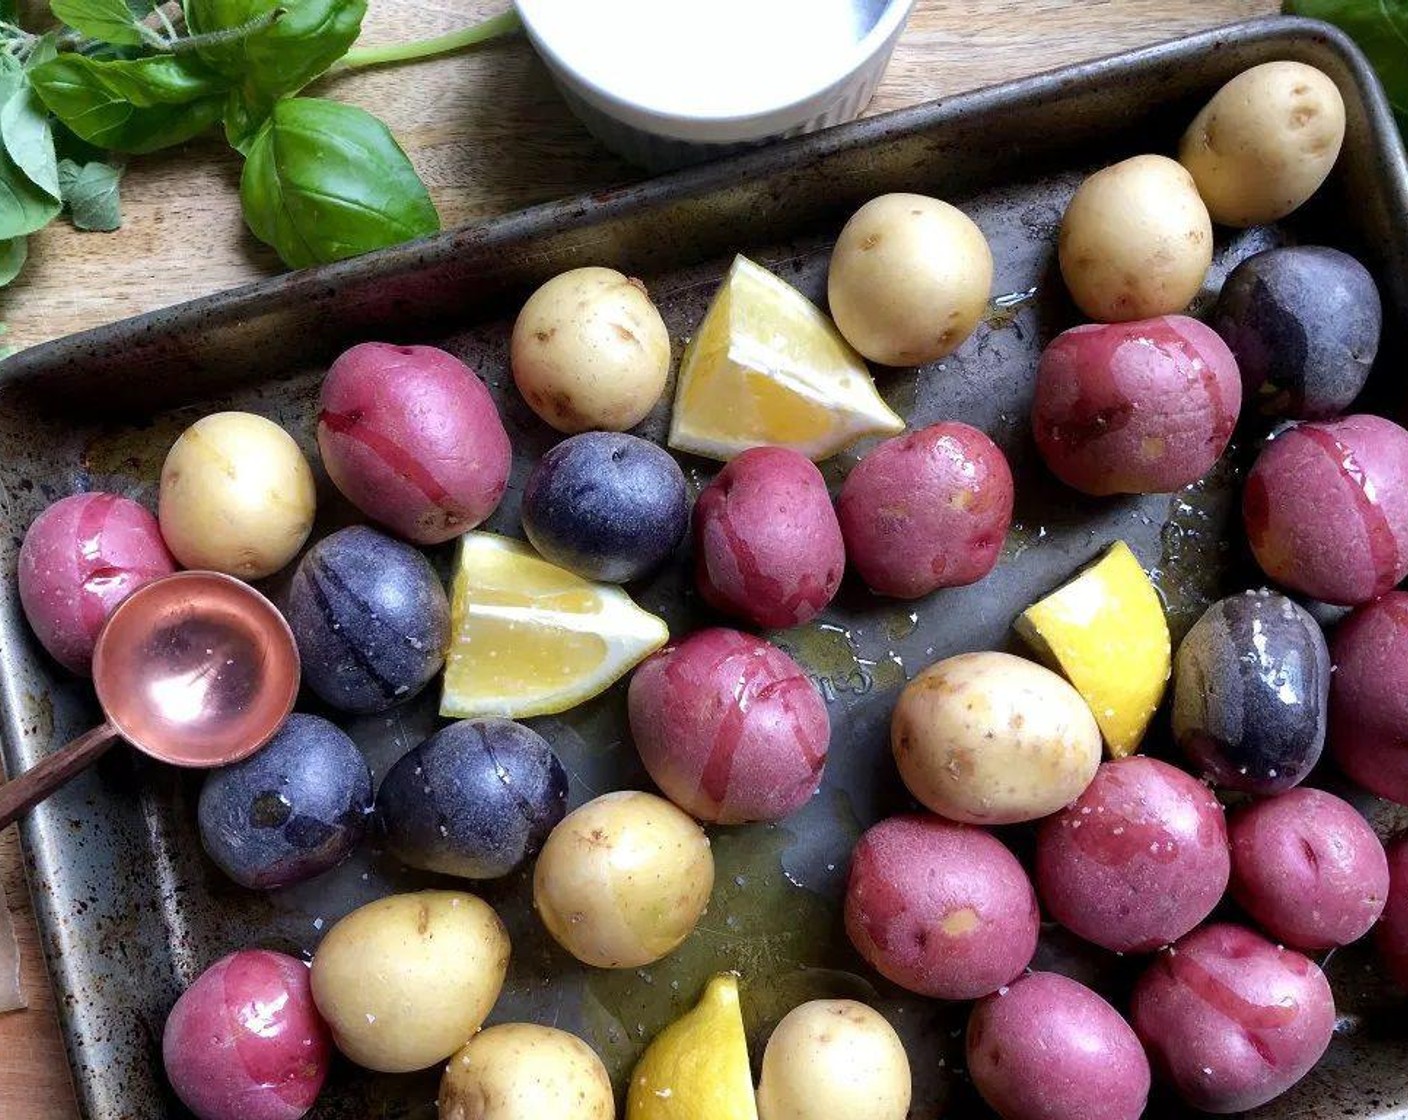 step 2 On a large baking sheet, toss together the Baby Potatoes (2 lb), Lemon (1/2), Olive Oil (1 Tbsp), and a generous pinch of salt. Place in the oven and roast for 20 minutes or until the potatoes are fork tender.